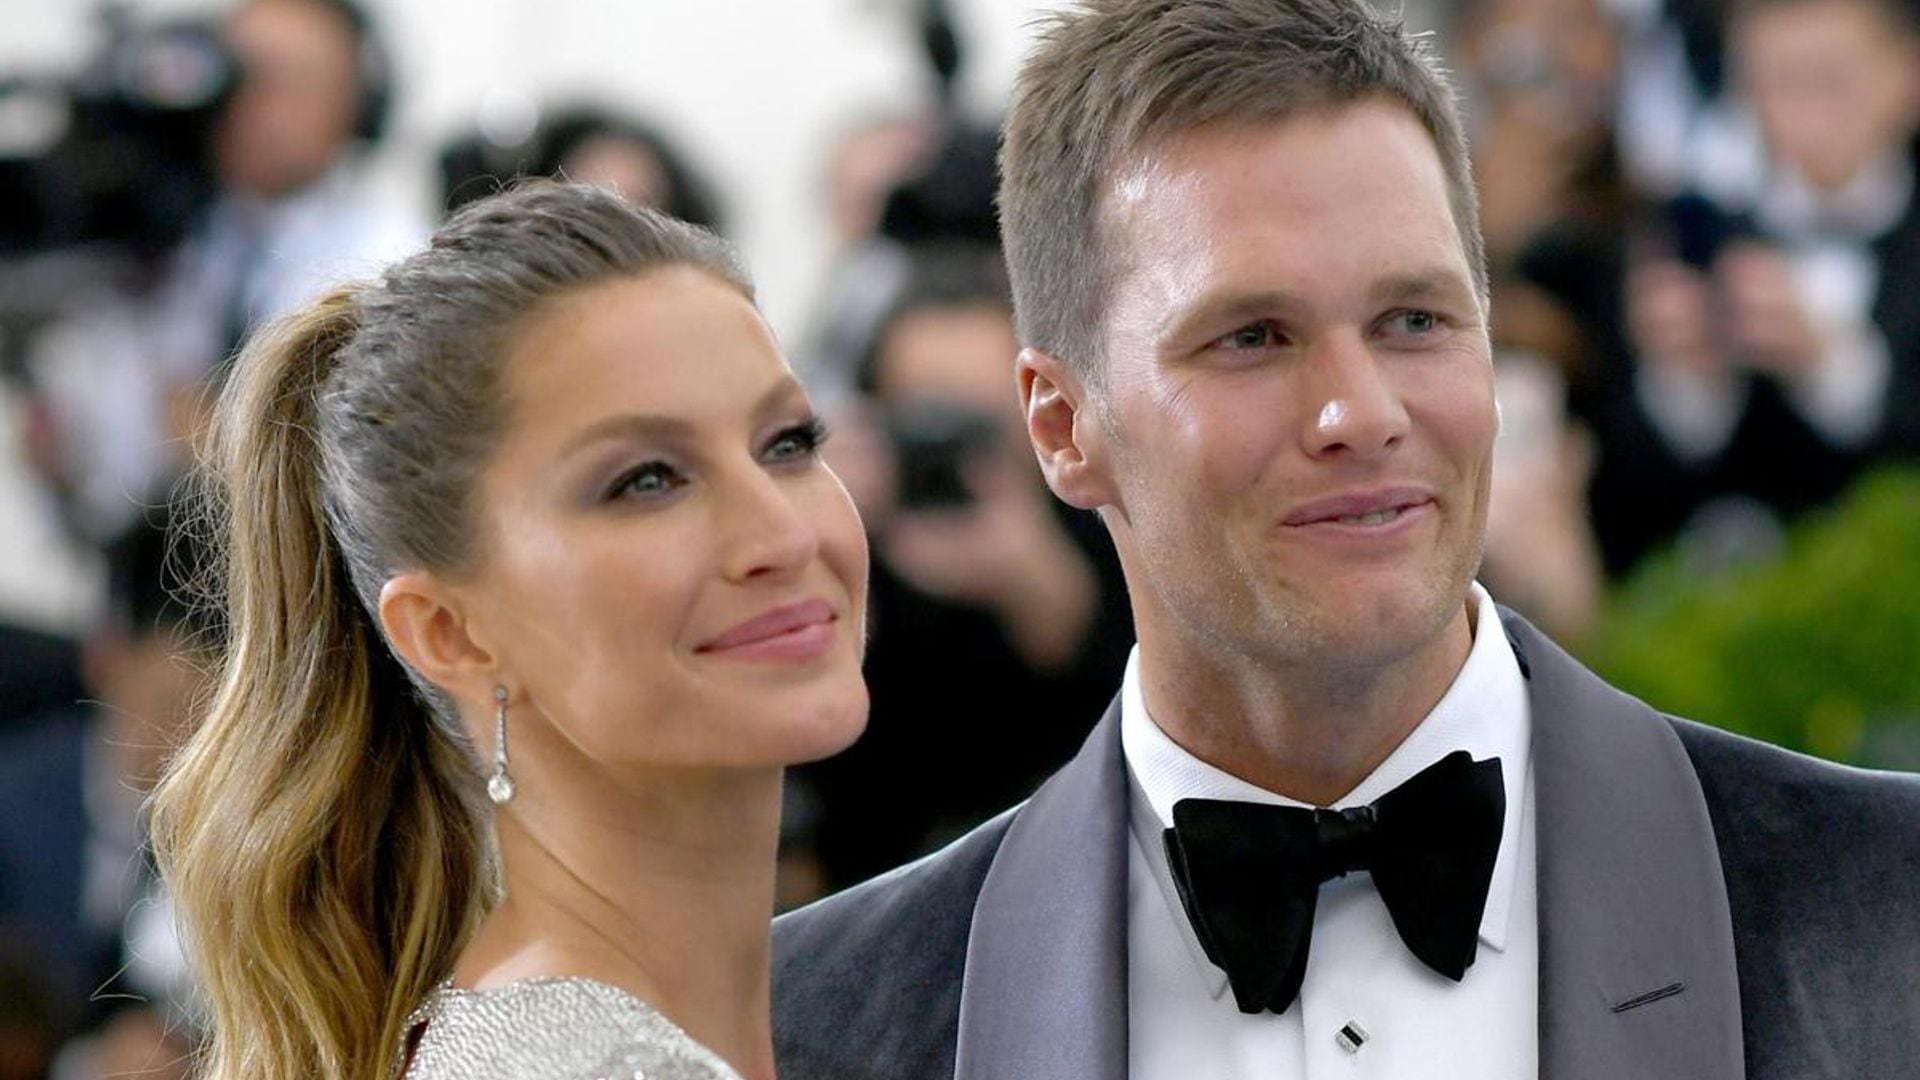 Gisele Bündchen releases statement on divorce from Tom Brady: ‘We have grown apart’